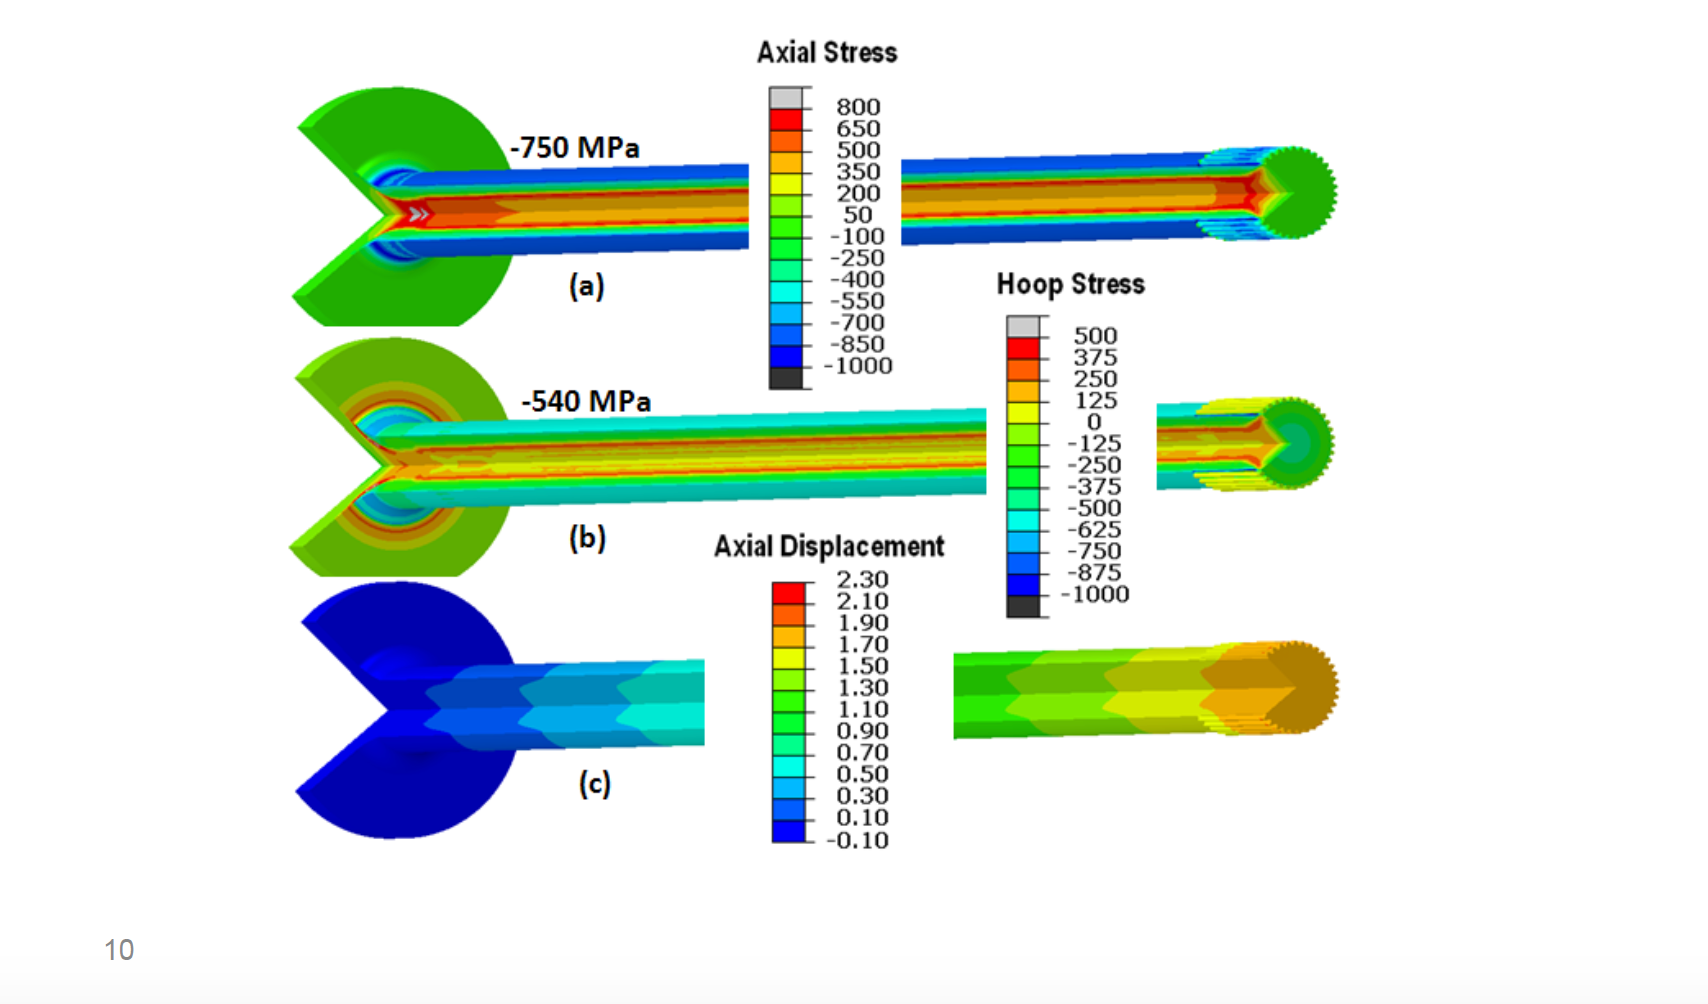 Fluxtrol | Integrated Computational Development of Induction Heat Treatment Process for Automotive Axle Shafts Figure 9 - Stresses and Dimensional Movement after Hardening